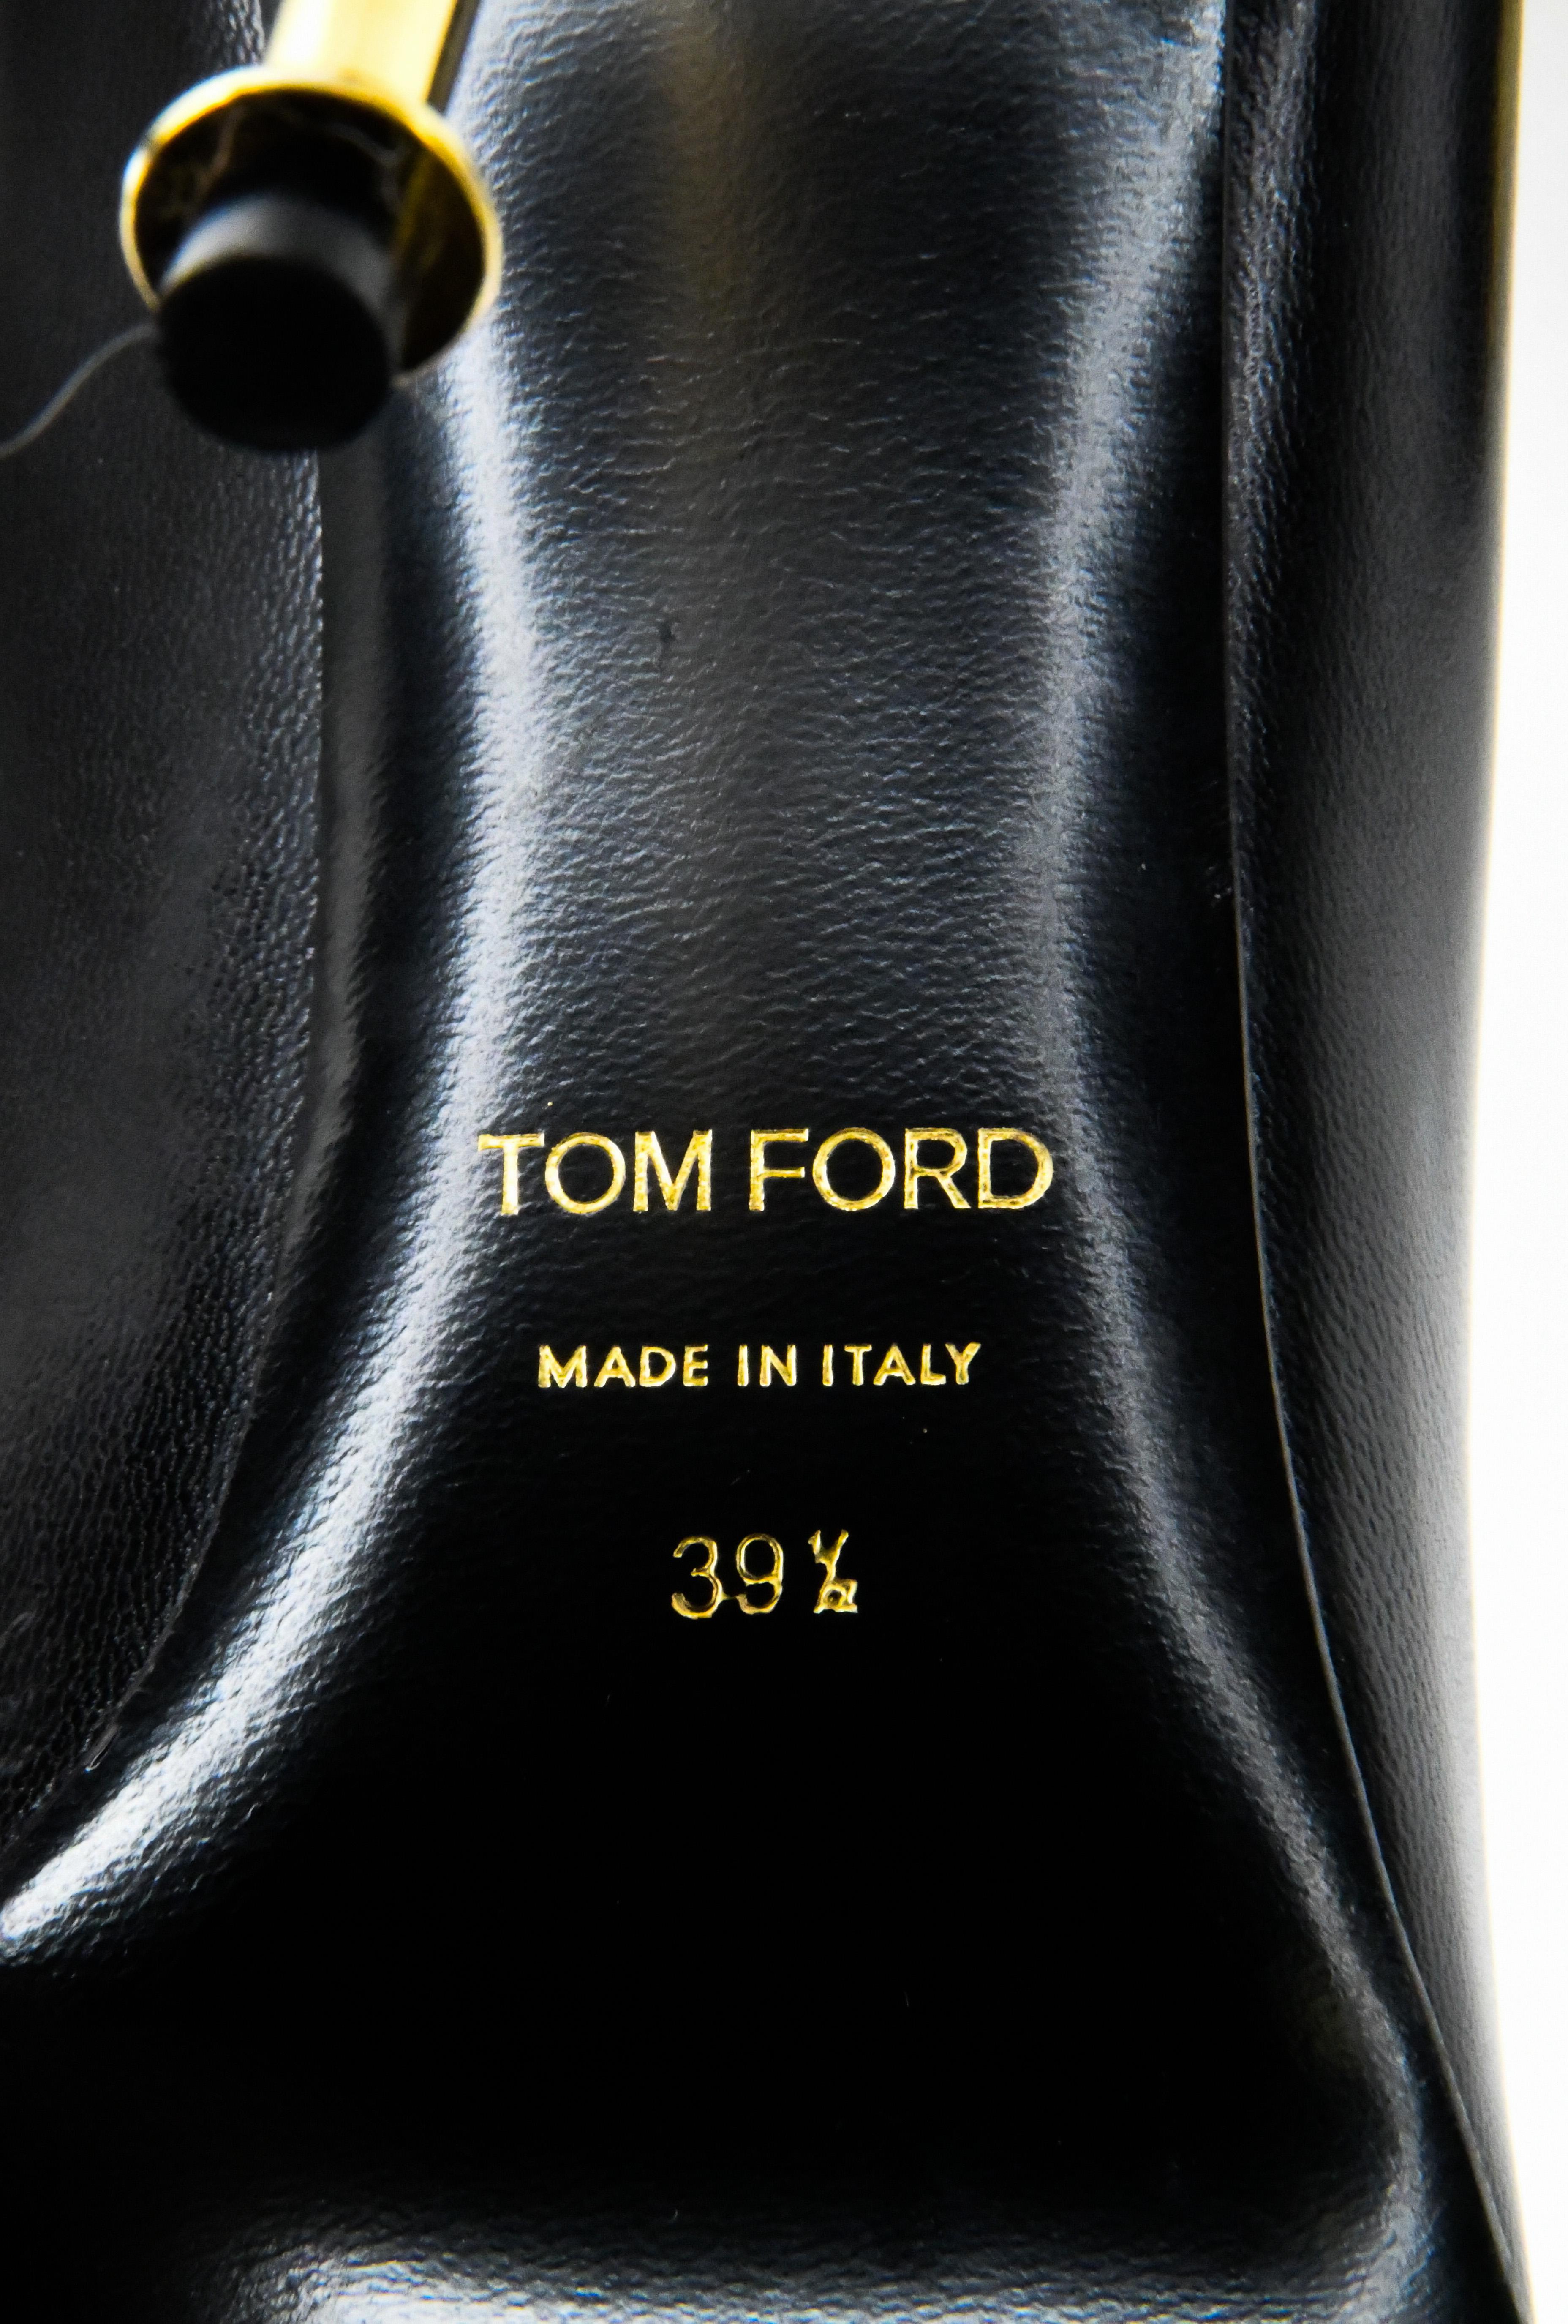 Tom Ford Black Leather Pumps With Gold Stiletto Heels  1